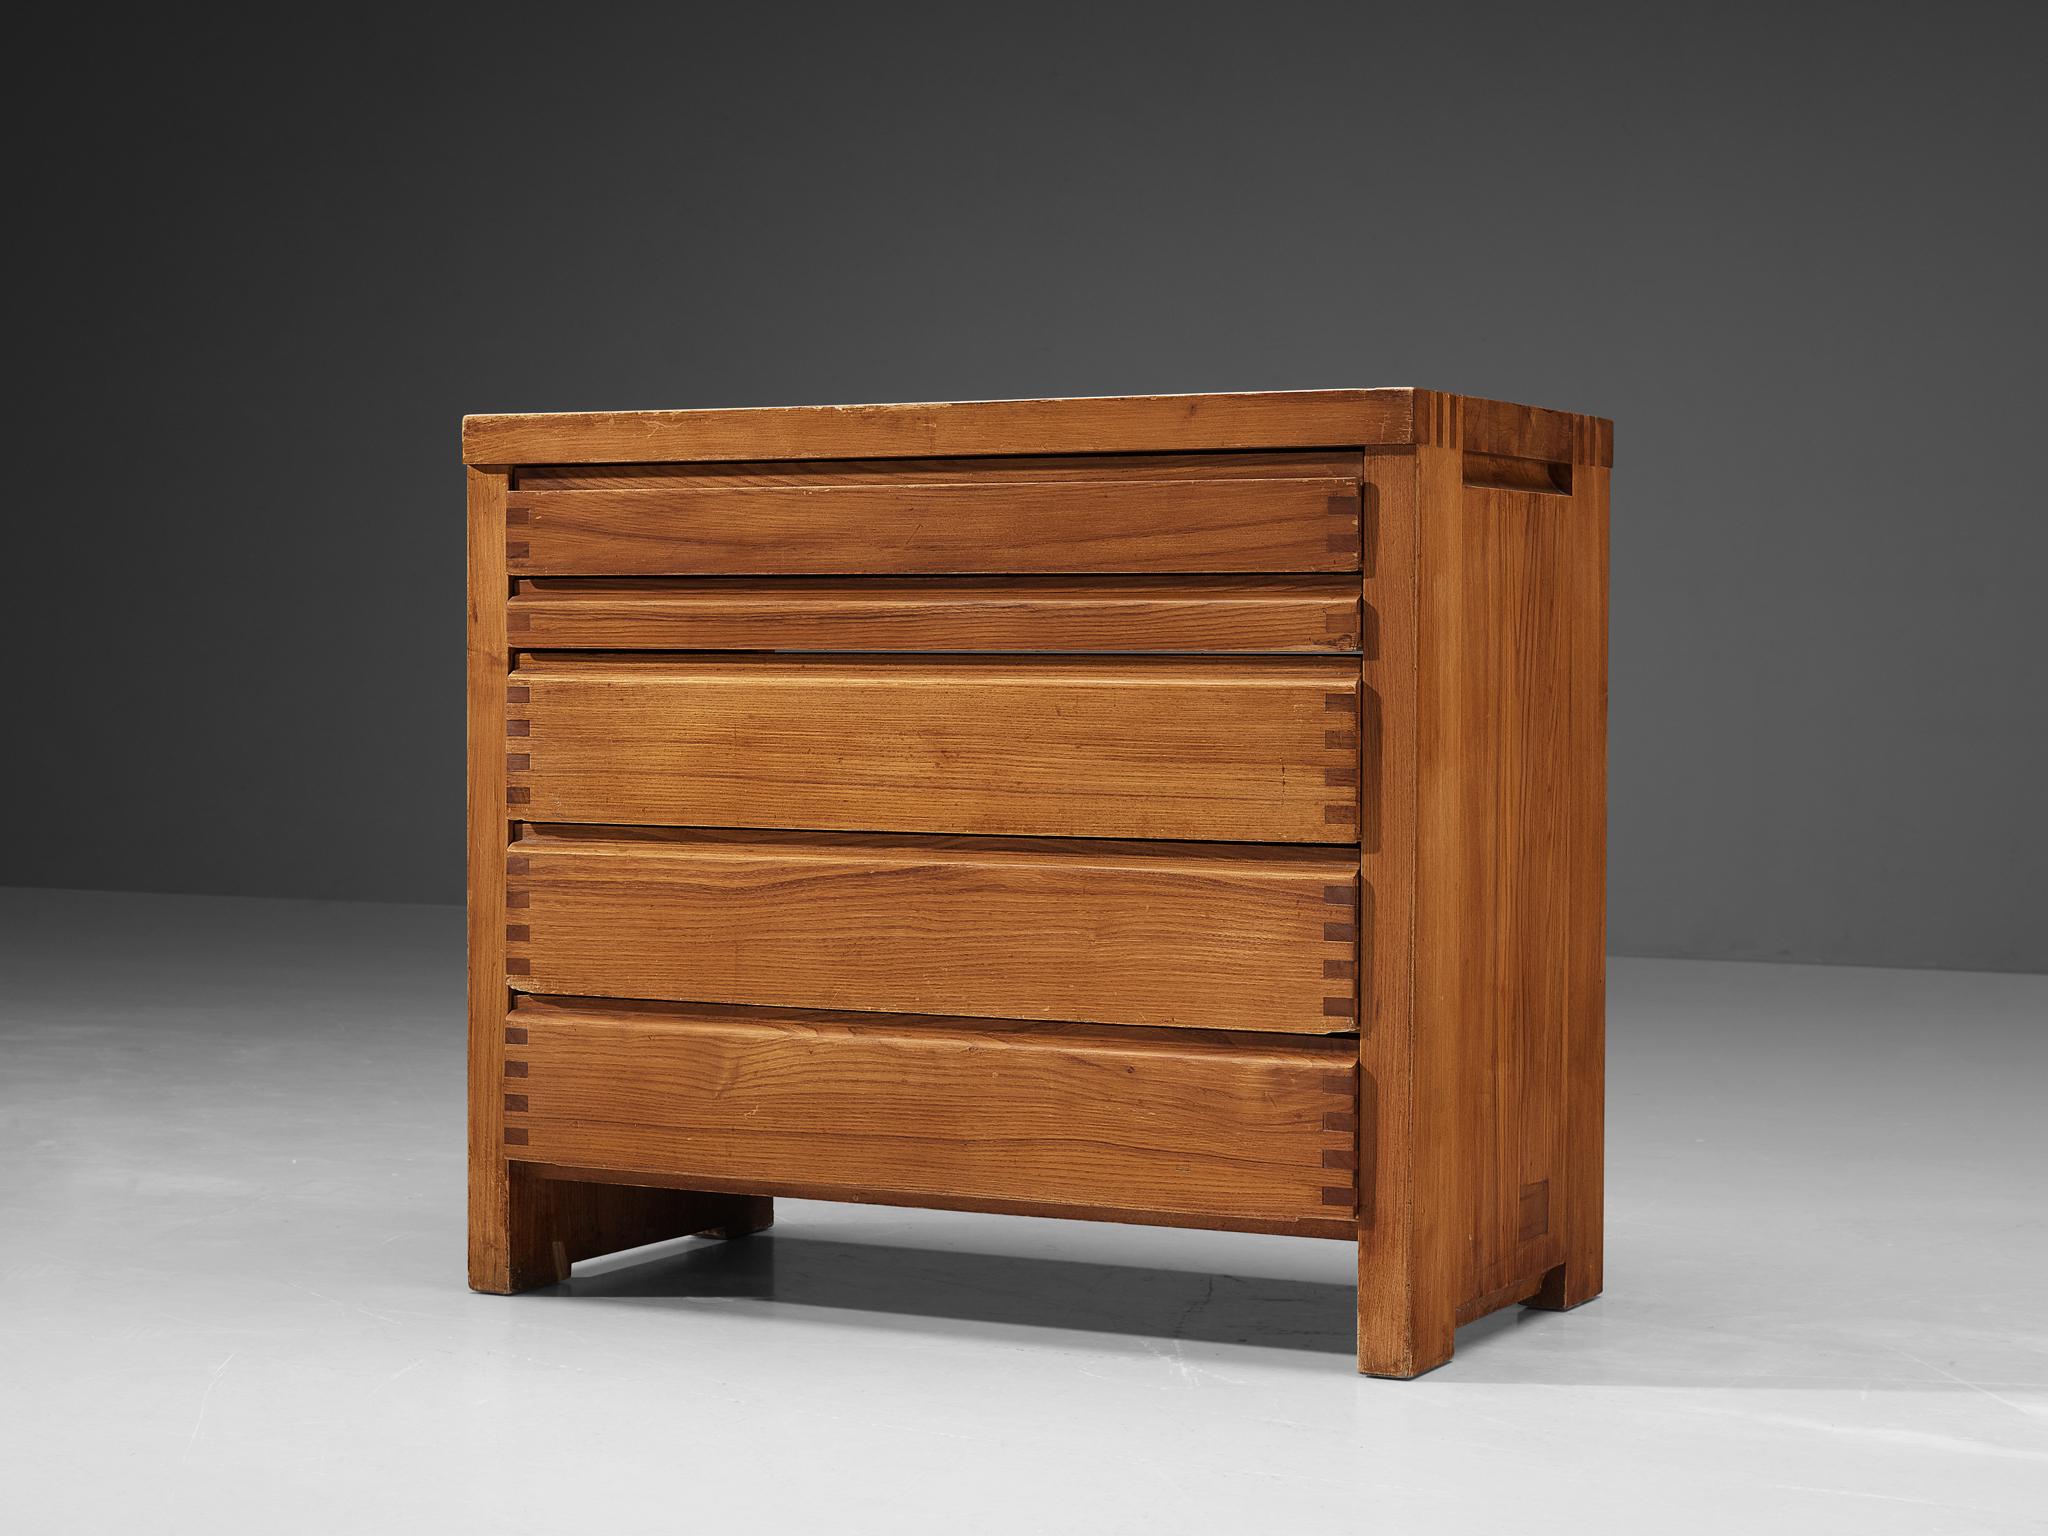 Pierre Chapo, chest of drawers, model 'R09A', solid elm, France, circa 1960

Beautifully crafted commode that combines a simplified yet complex design with nifty, solid construction details that characterize Chapo's work. The five drawers of which